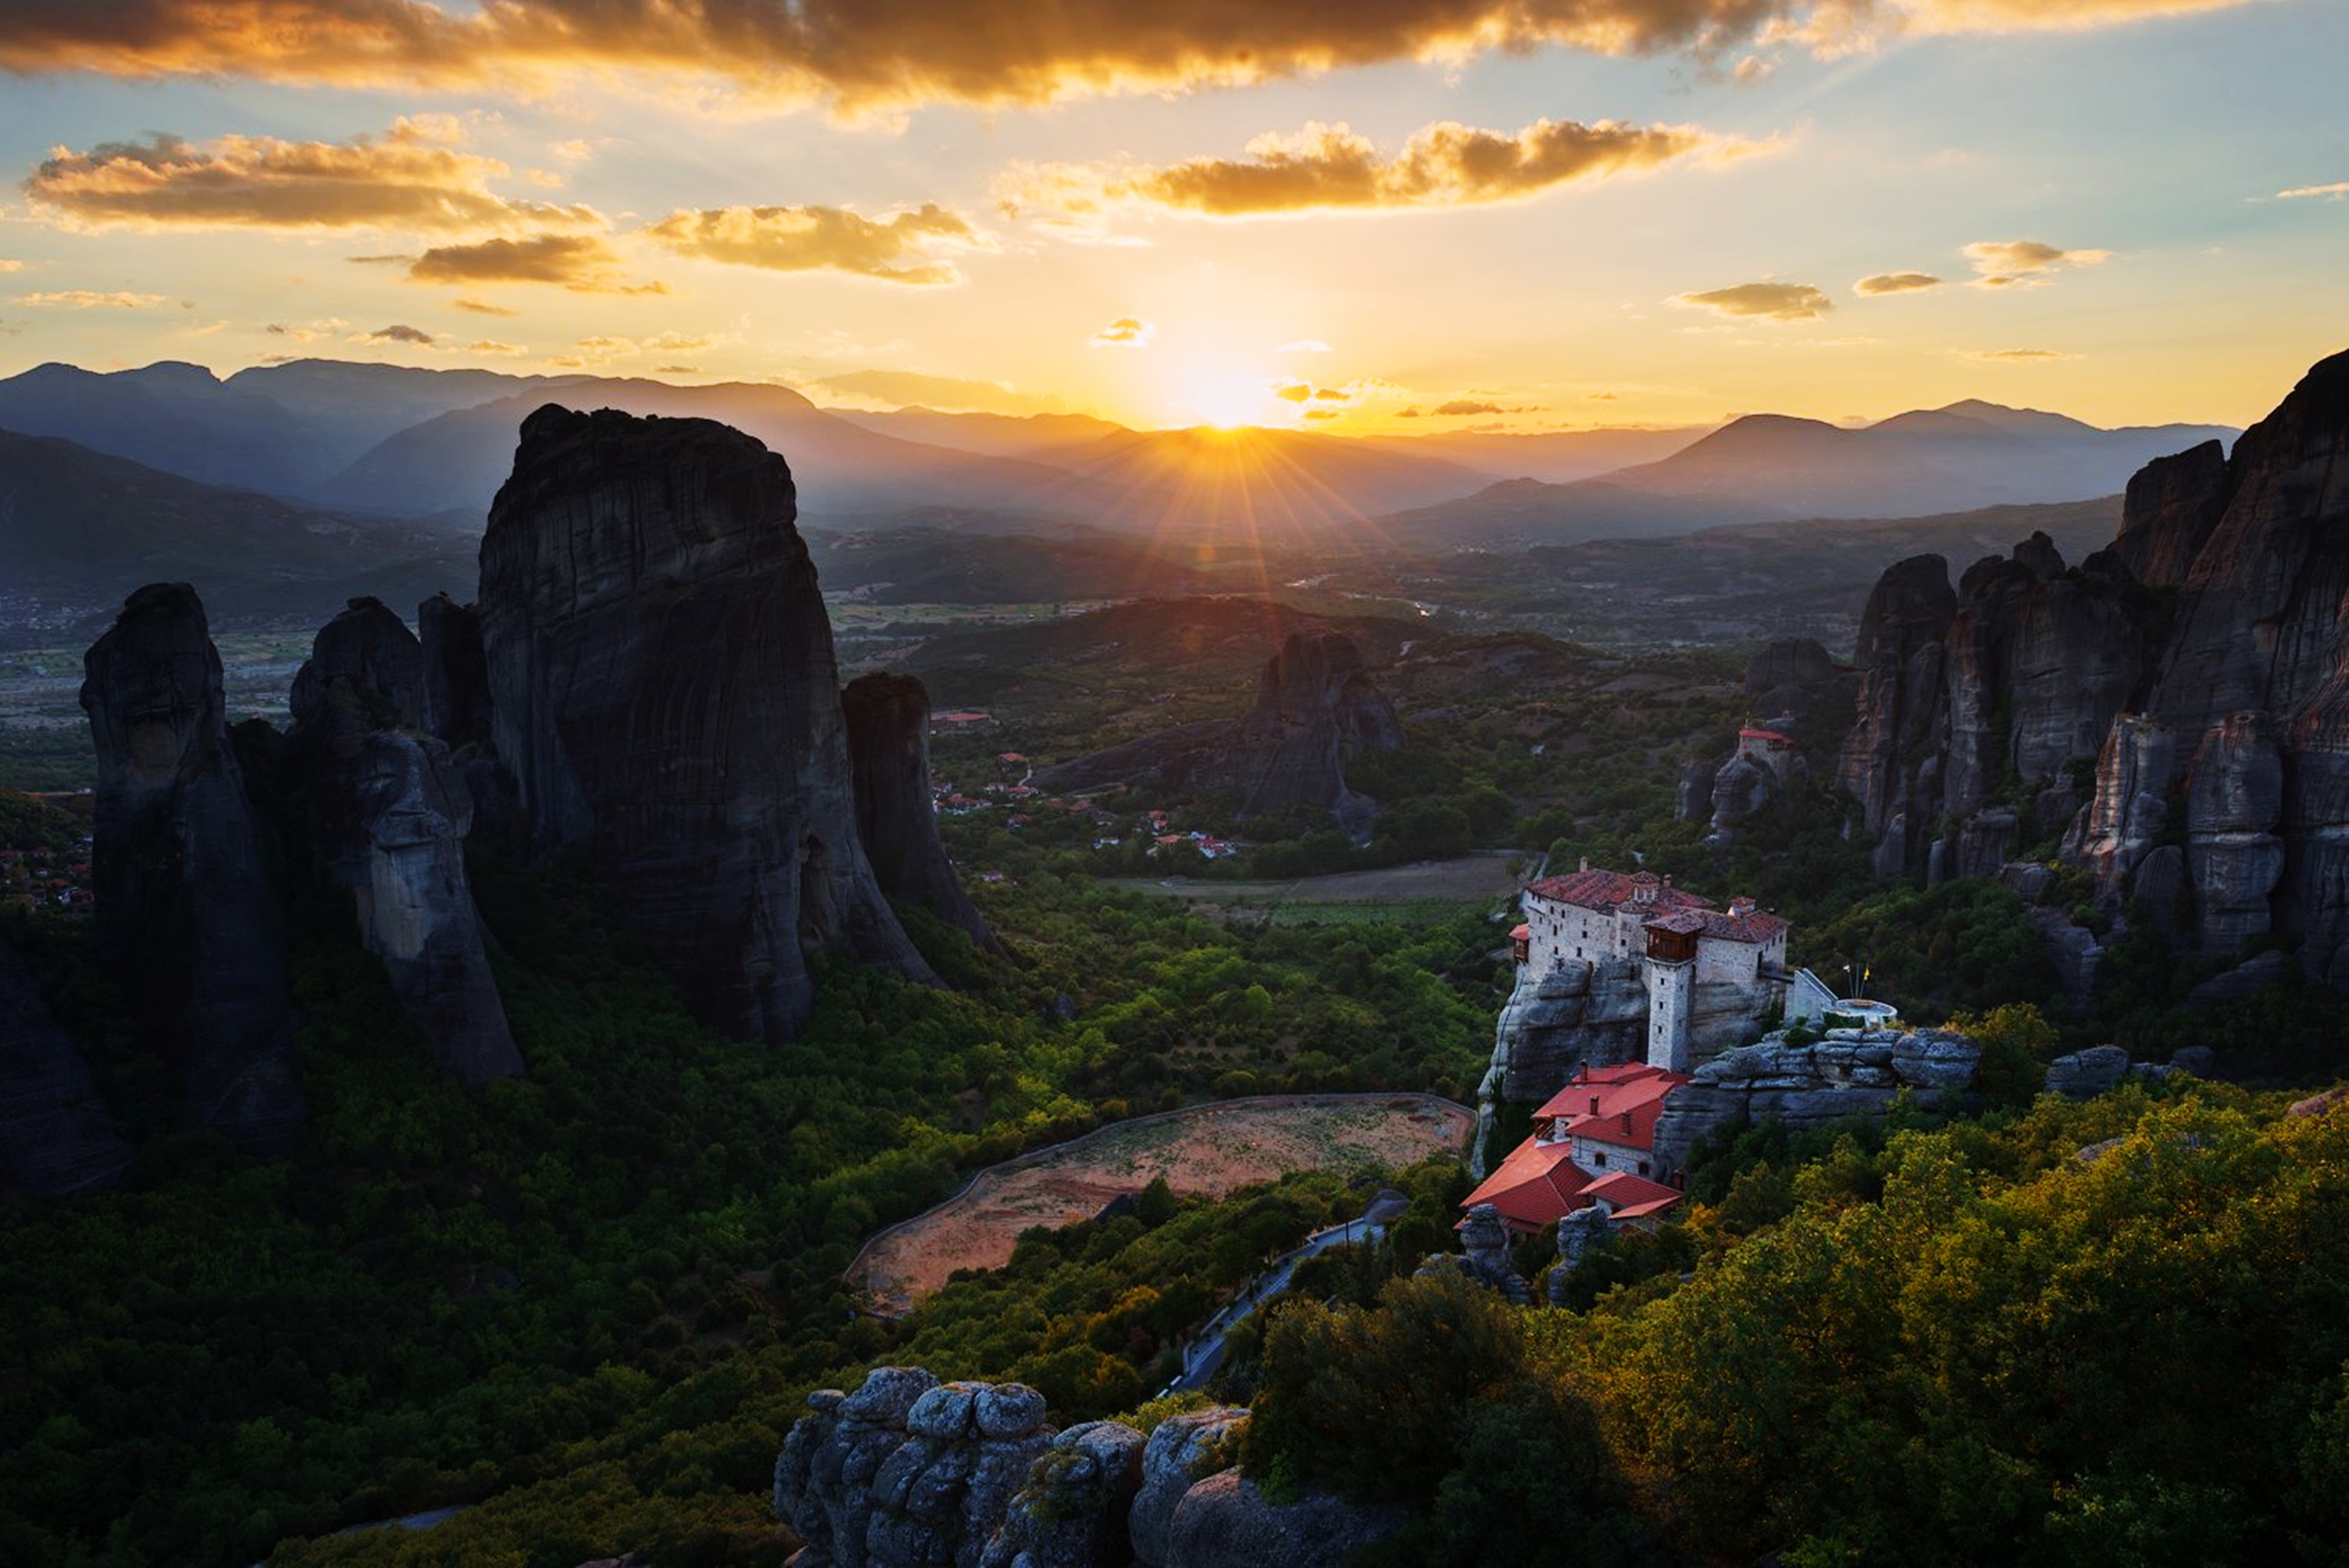 vertical wallpaper nature, greece, forest, sunset, religious, meteora, house, landscape, mountain